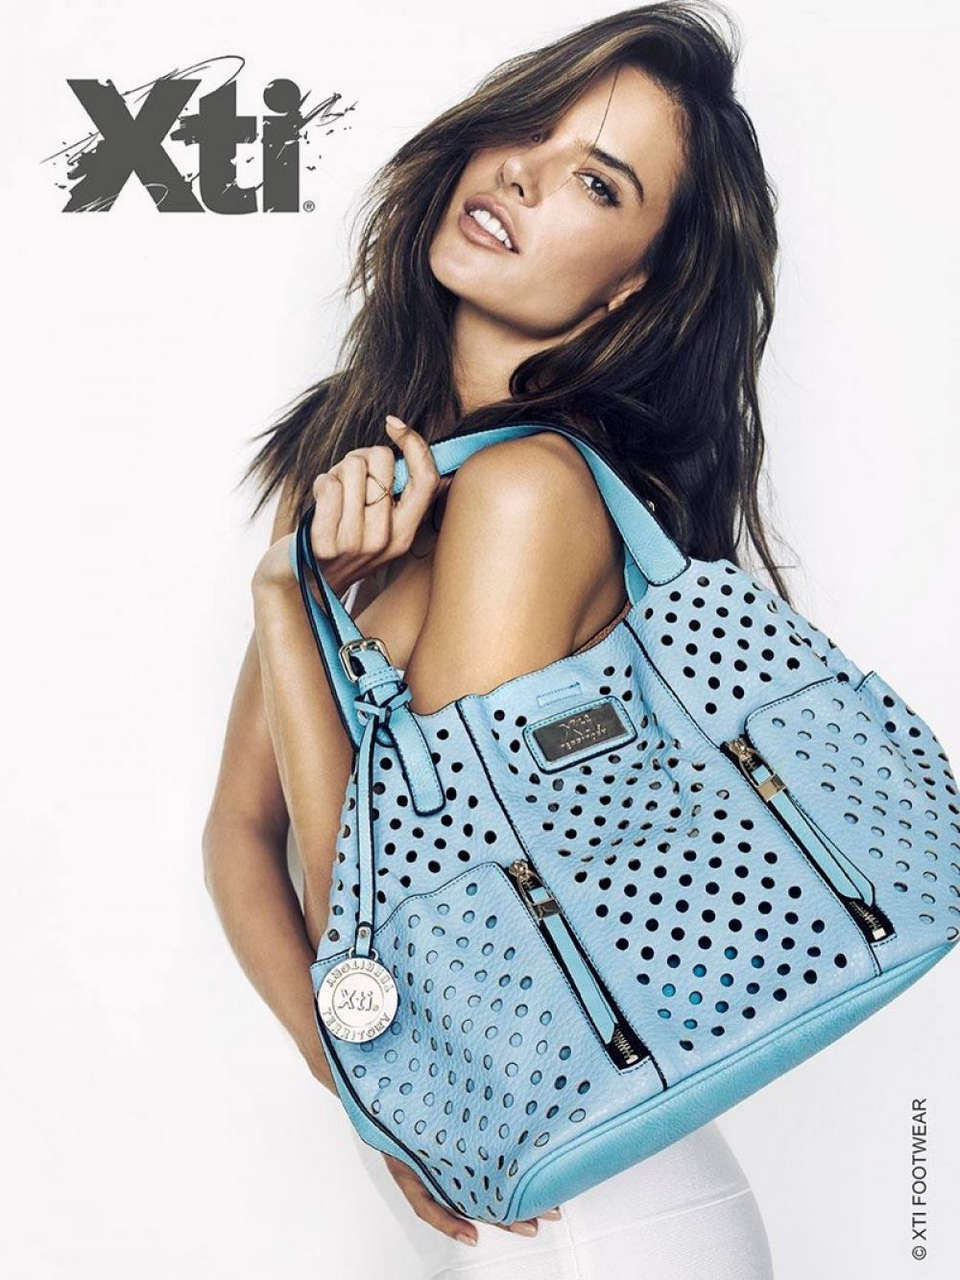 Alessandra Ambrosio For Xti Shoes Spring Summer 2016 Campaign